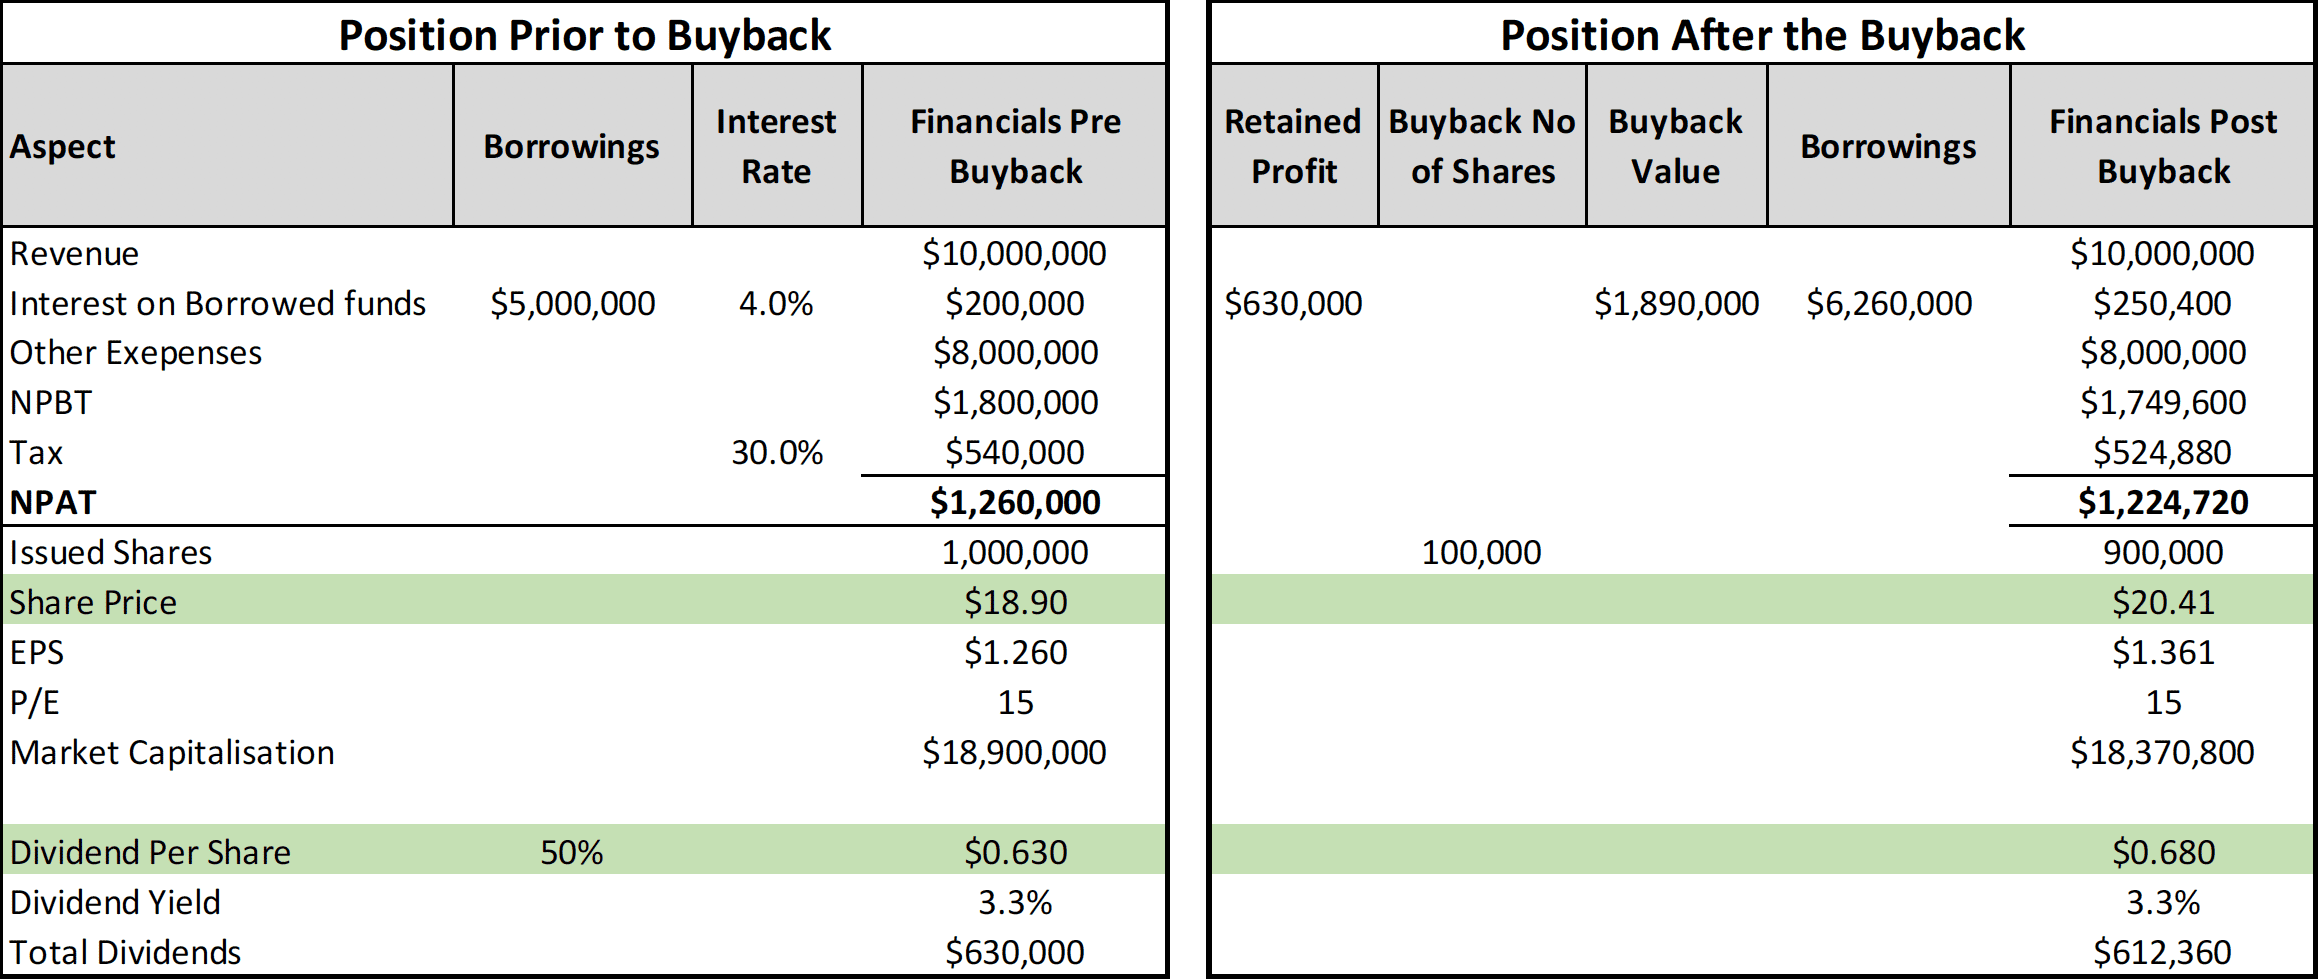 The expected impact of a buyback program in a company with reasonable debt and profit that distributes 50% of net profit after tax (NPAT) in dividends